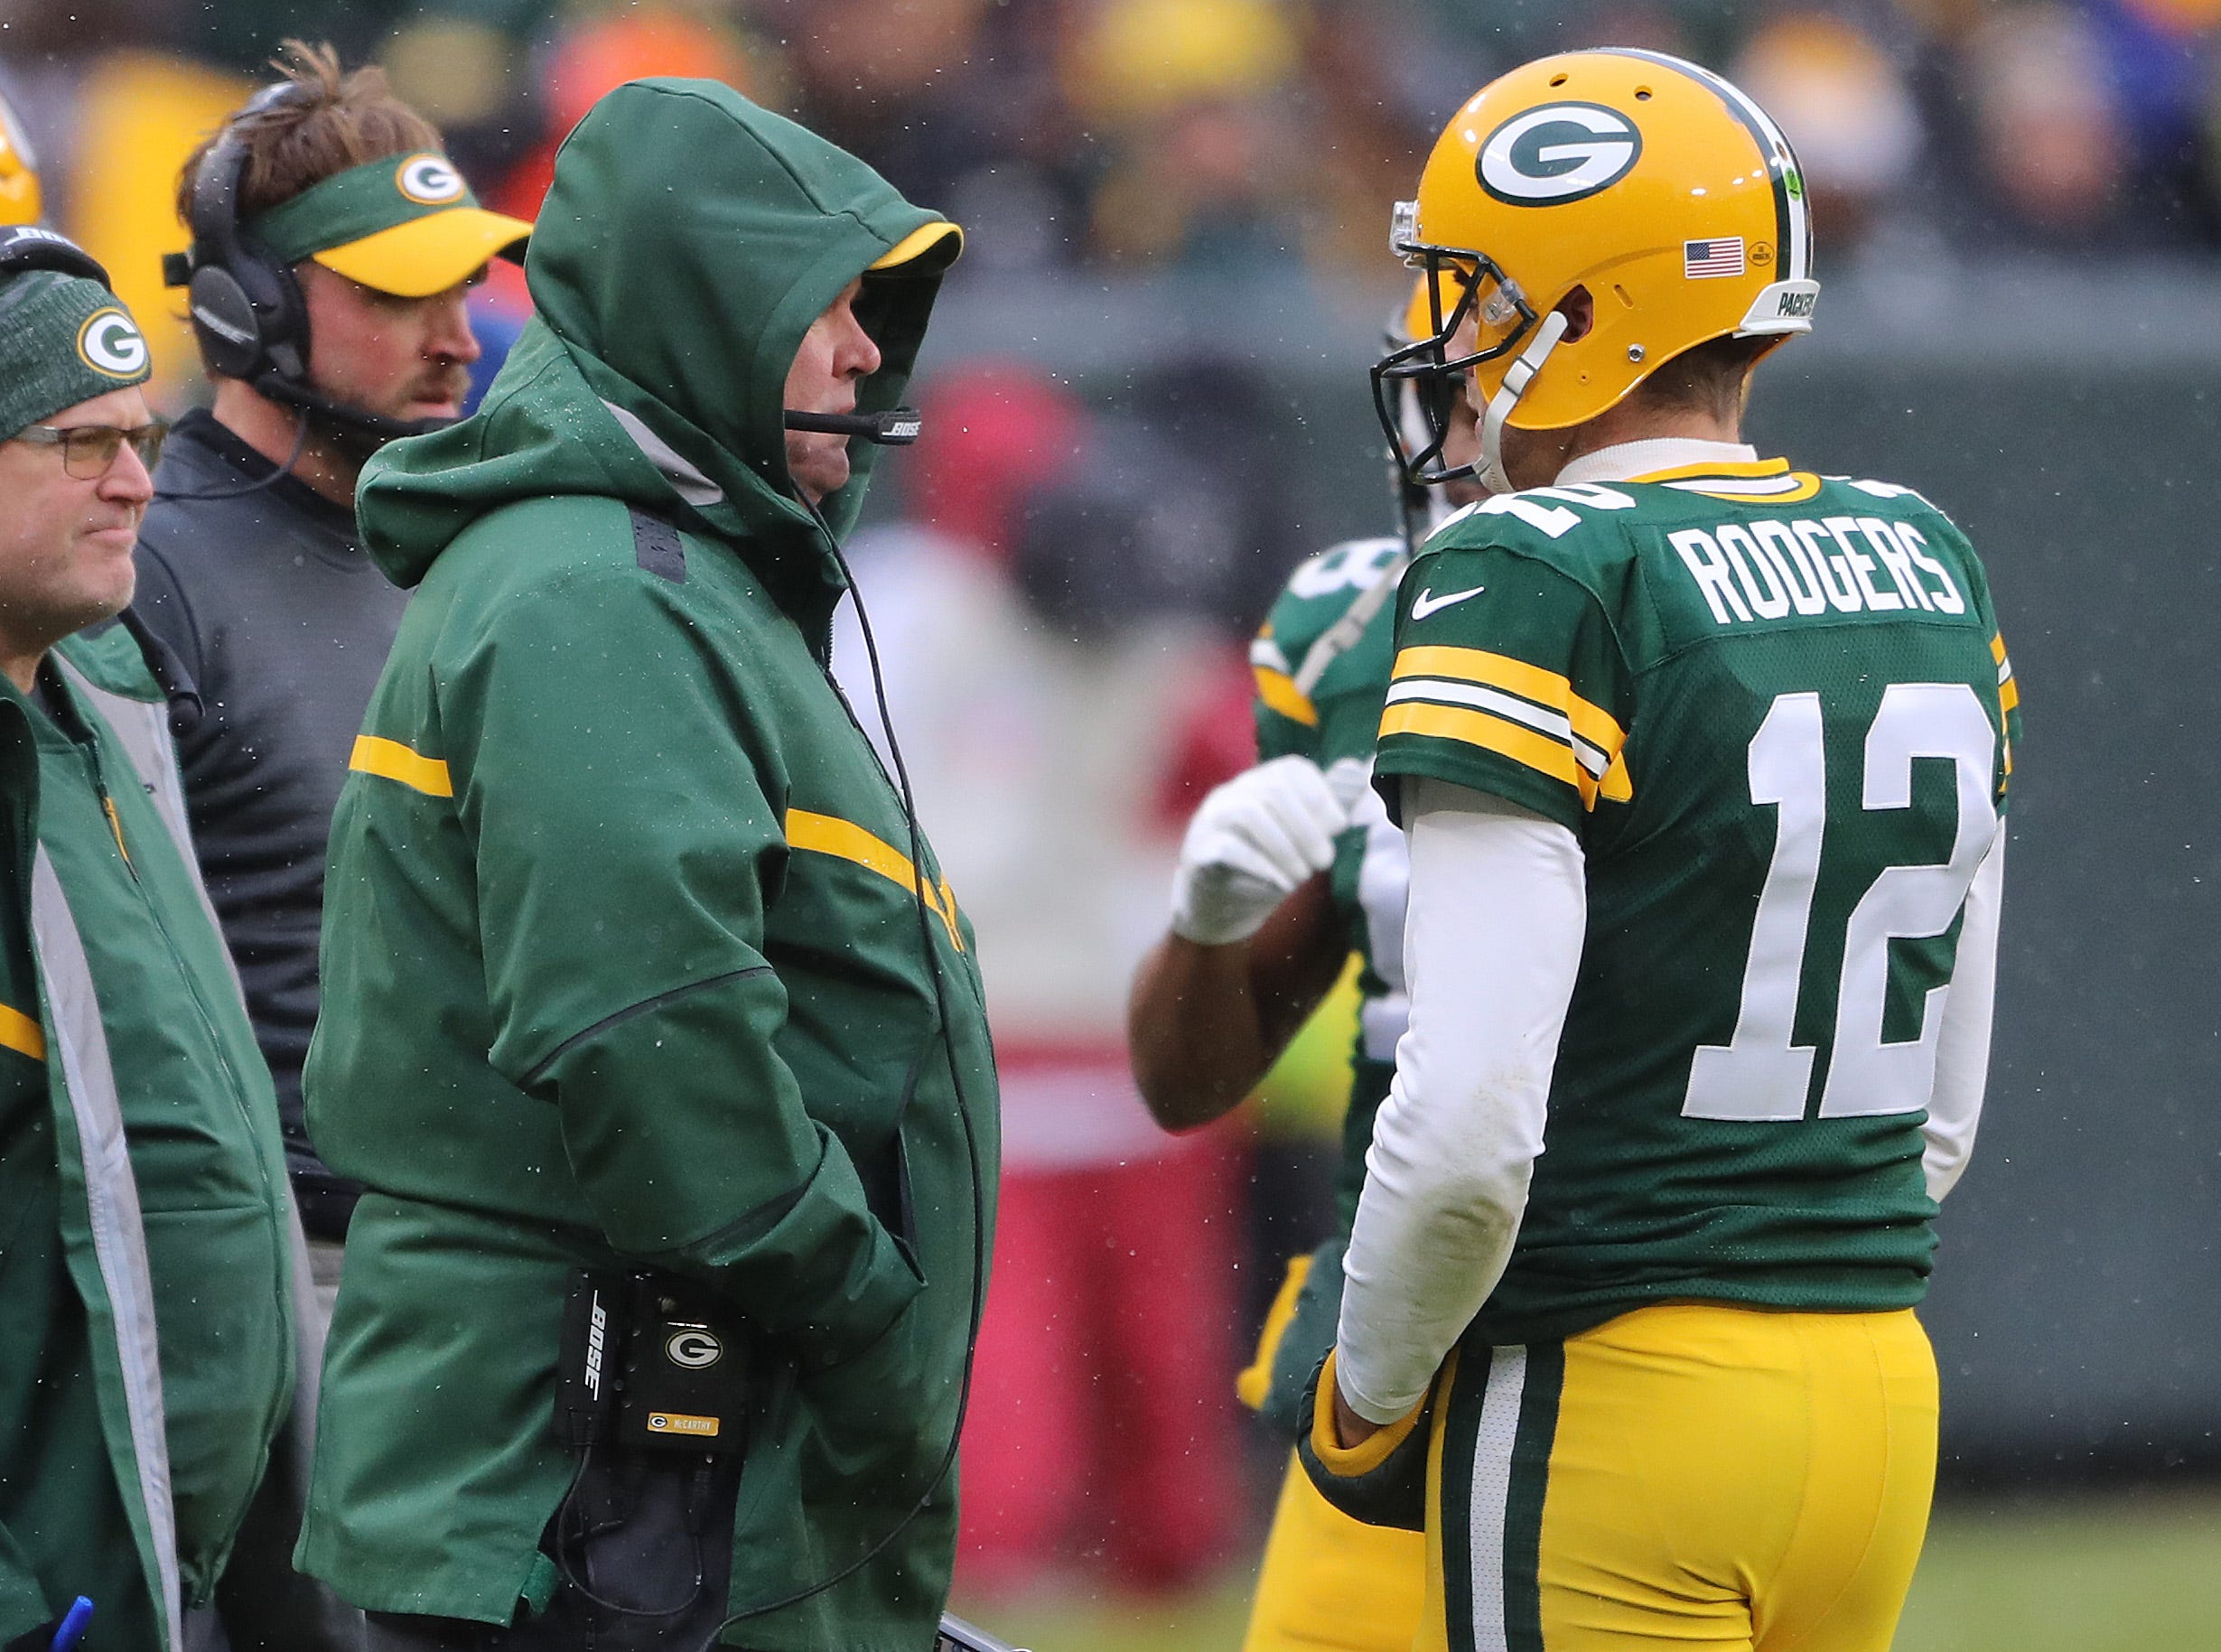 Green Bay Packers quarterback Aaron Rodgers (12) talks with Green Bay Packers' Mike McCarthy against the Arizona Cardinals Sunday, December 2, 2018 at Lambeau Field in Green Bay, Wis.
Jim Matthews/USA TODAY NETWORK-Wis